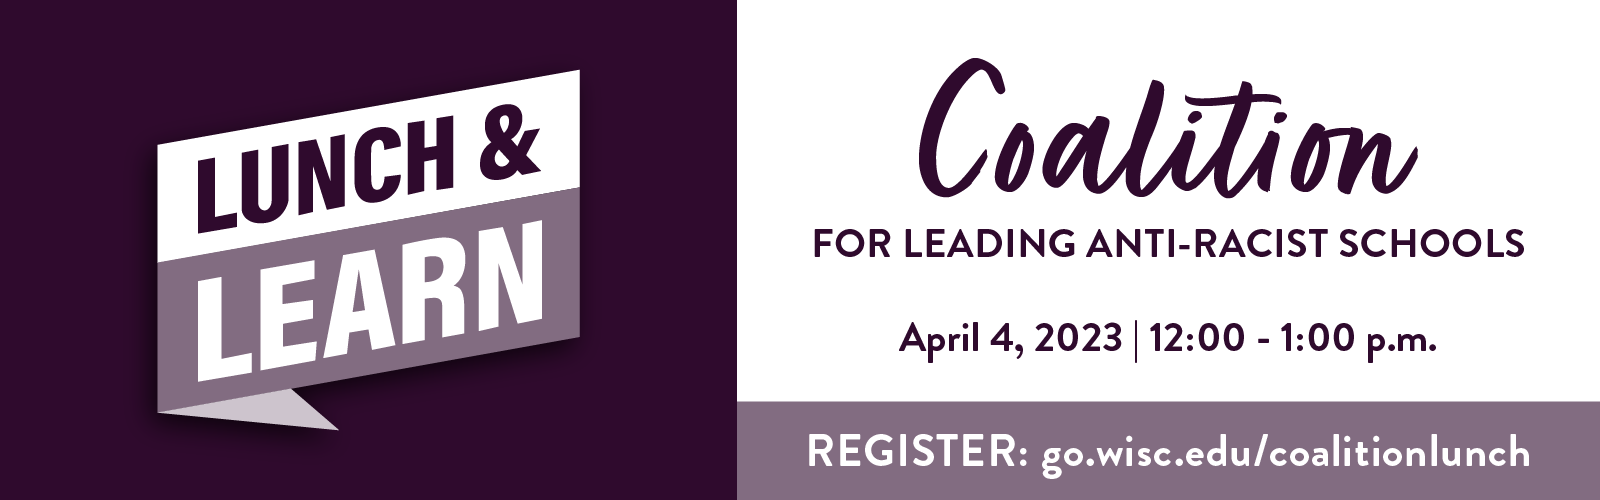 Coalition for Leading Anti-Racist Schools Lunch and Learn event. April 4, 12-1 pm visit: go.wisc.edu/coalitionlunch to register